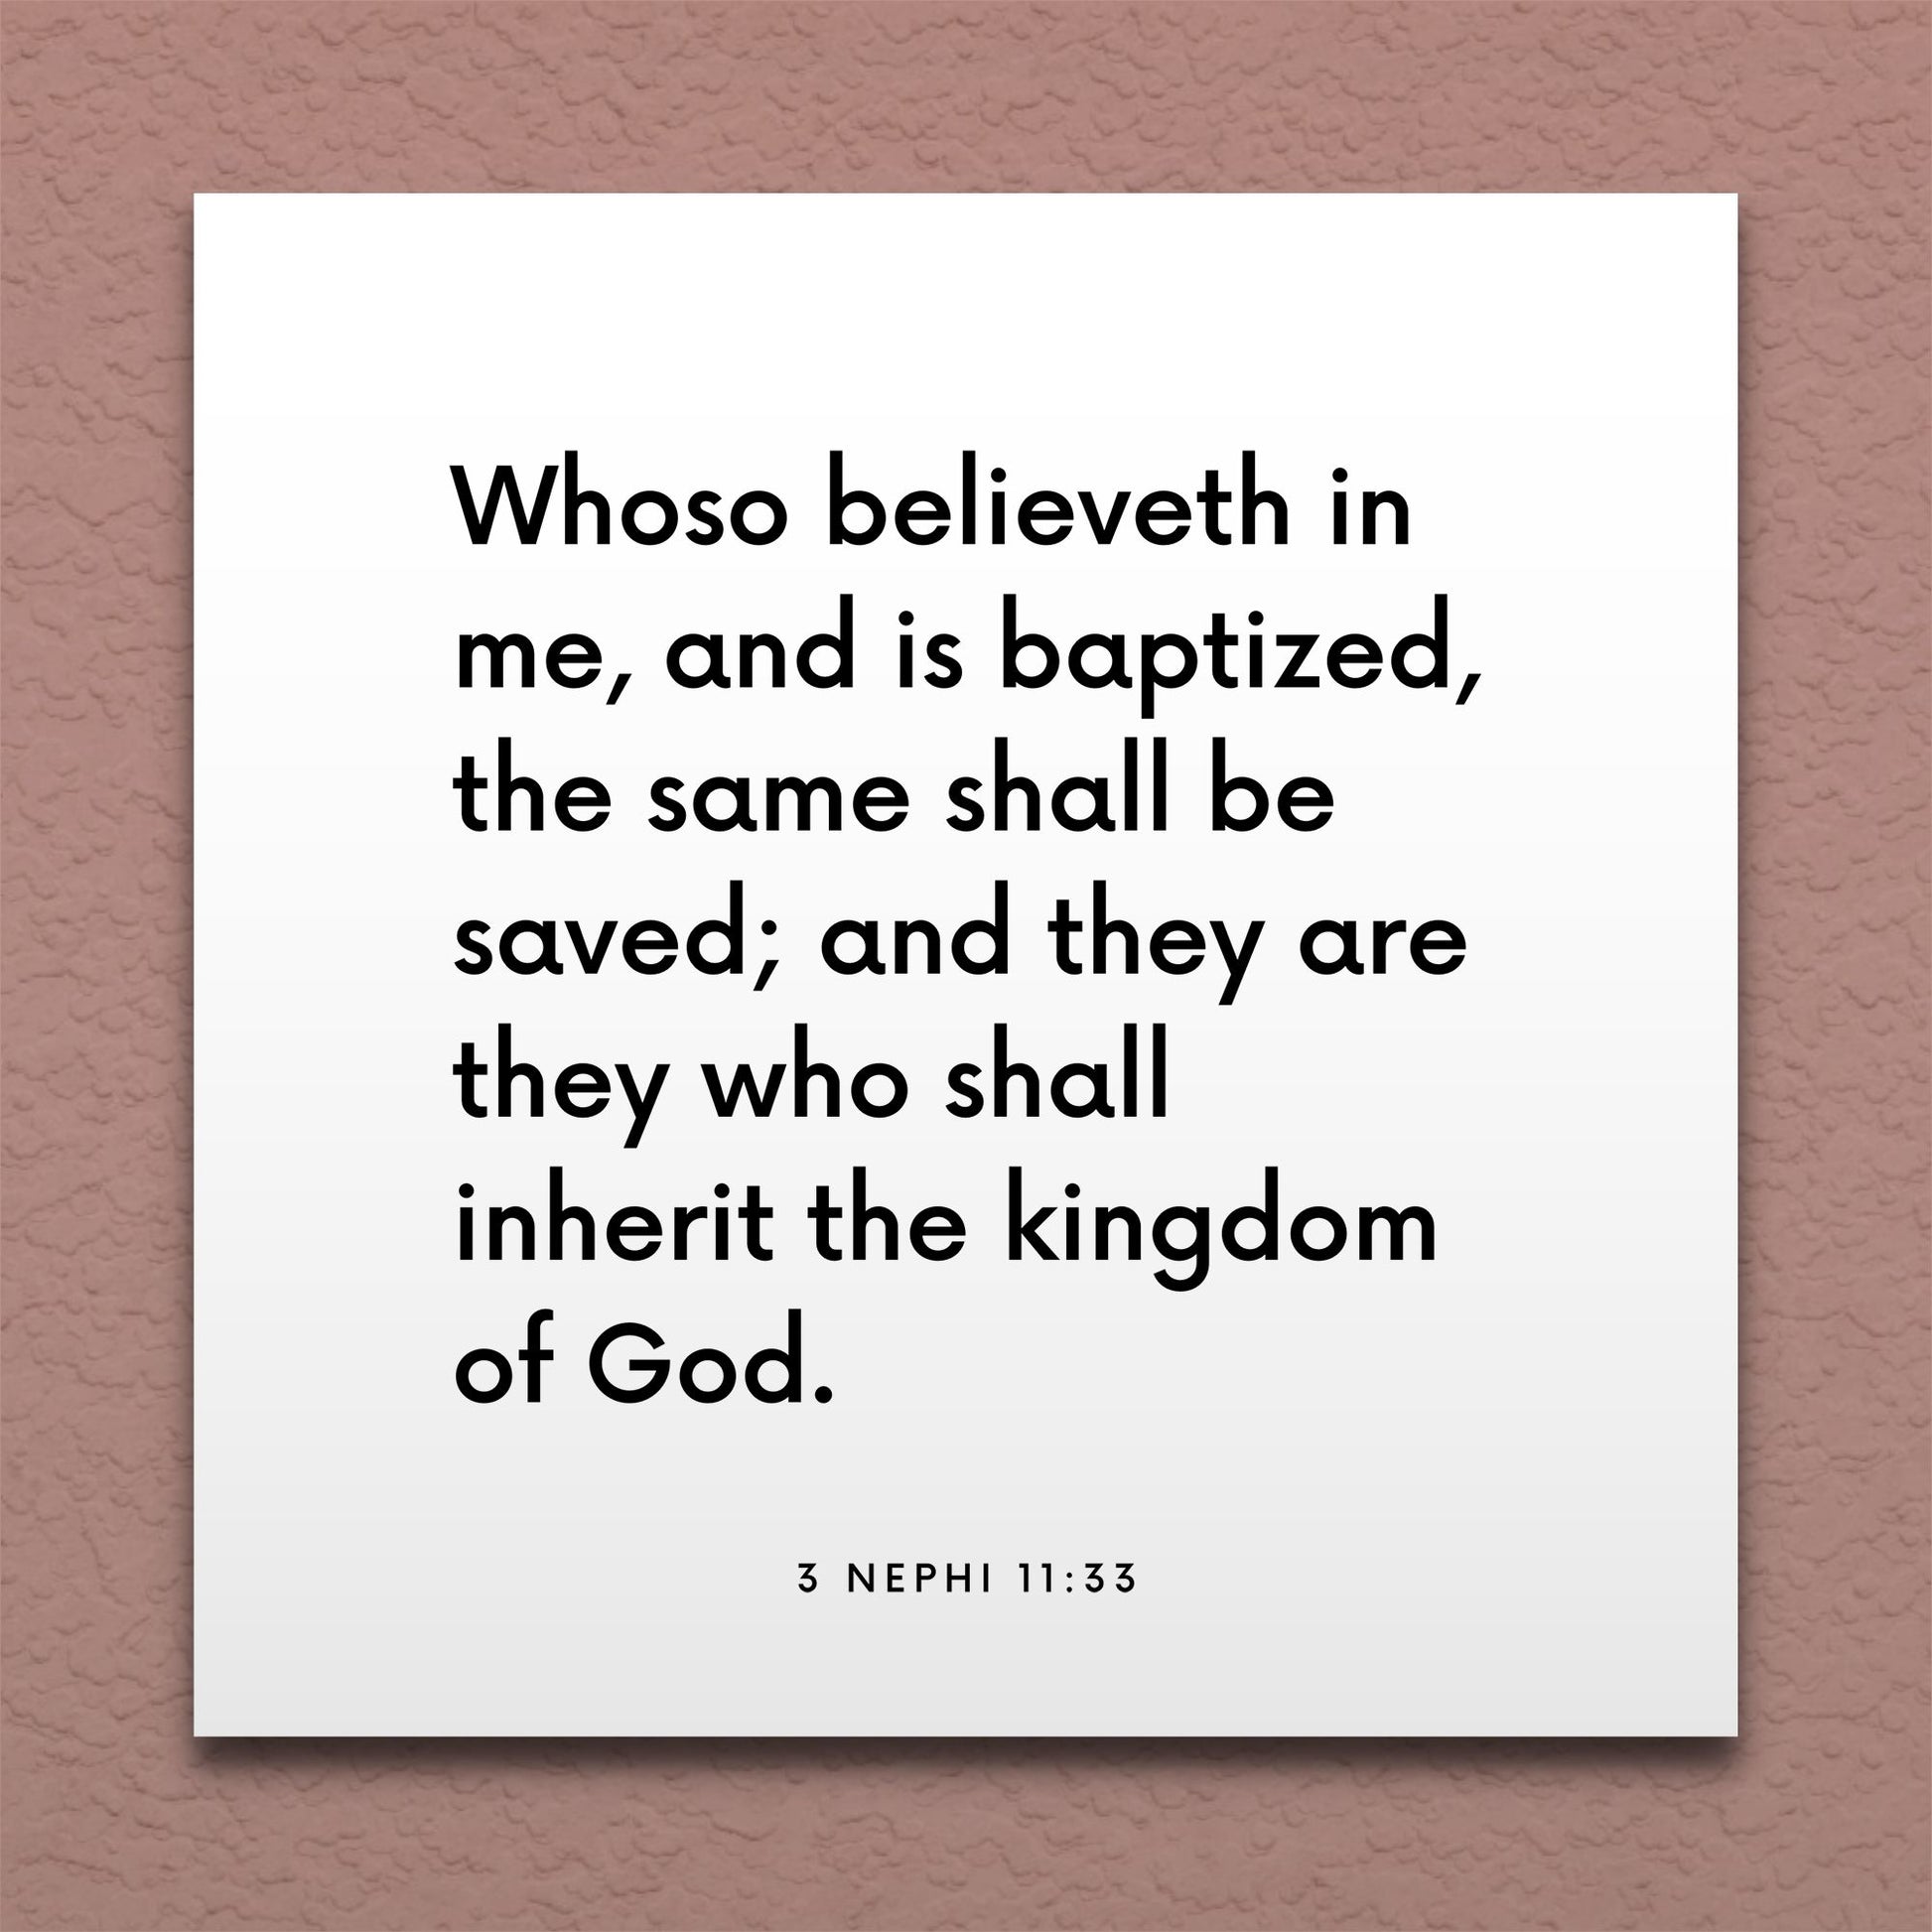 Wall-mounted scripture tile for 3 Nephi 11:33 - "Whoso believeth in me, and is baptized, shall be saved"